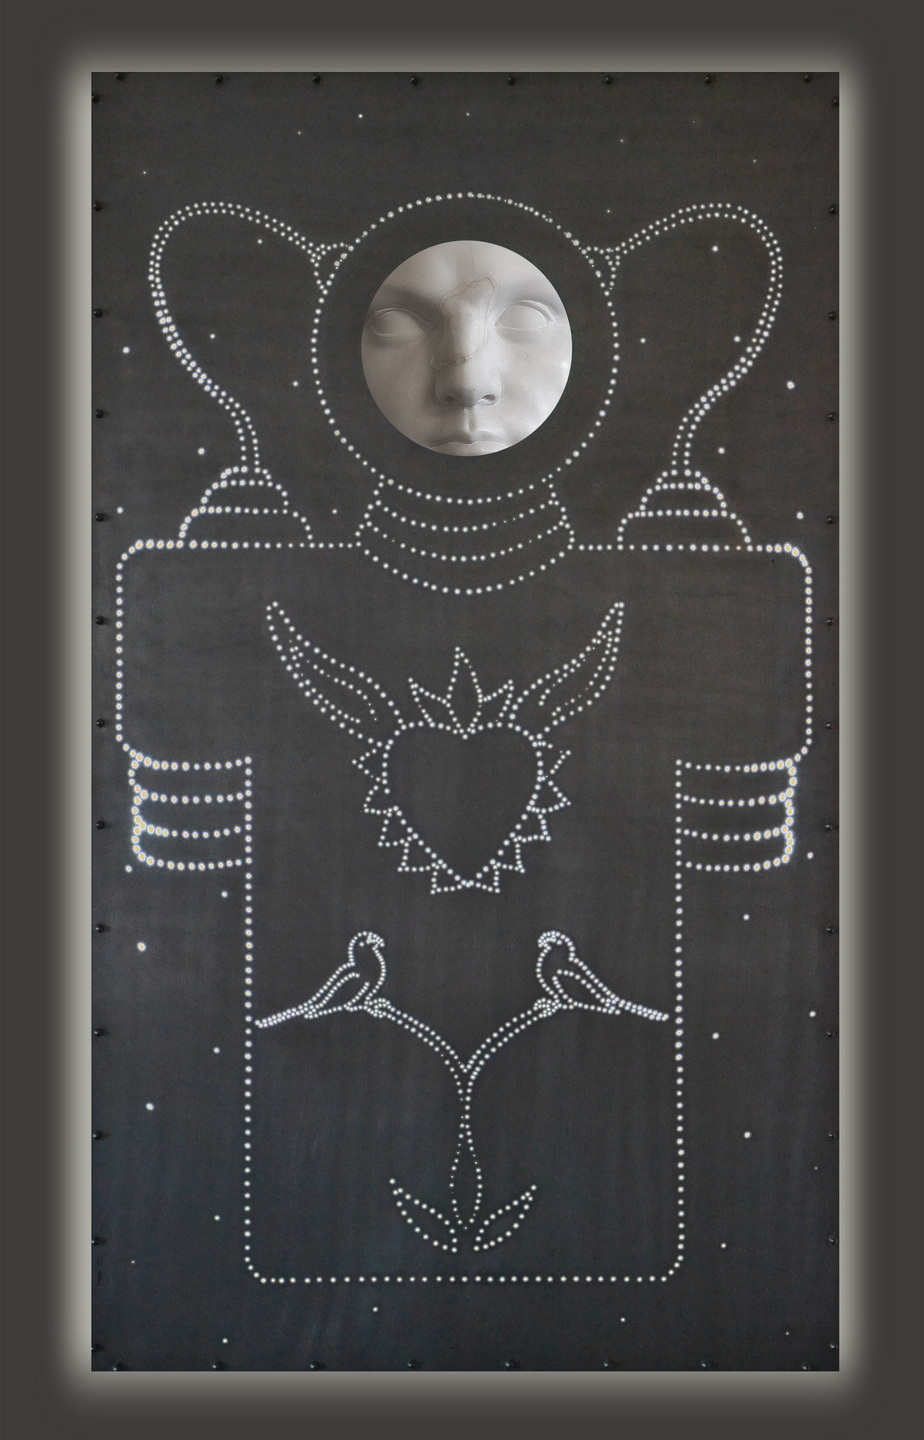 Pietro Mancini - Holy Astronaut cm 75 x 120 x 5 _backlit perforated aluminum and polycarbonate print